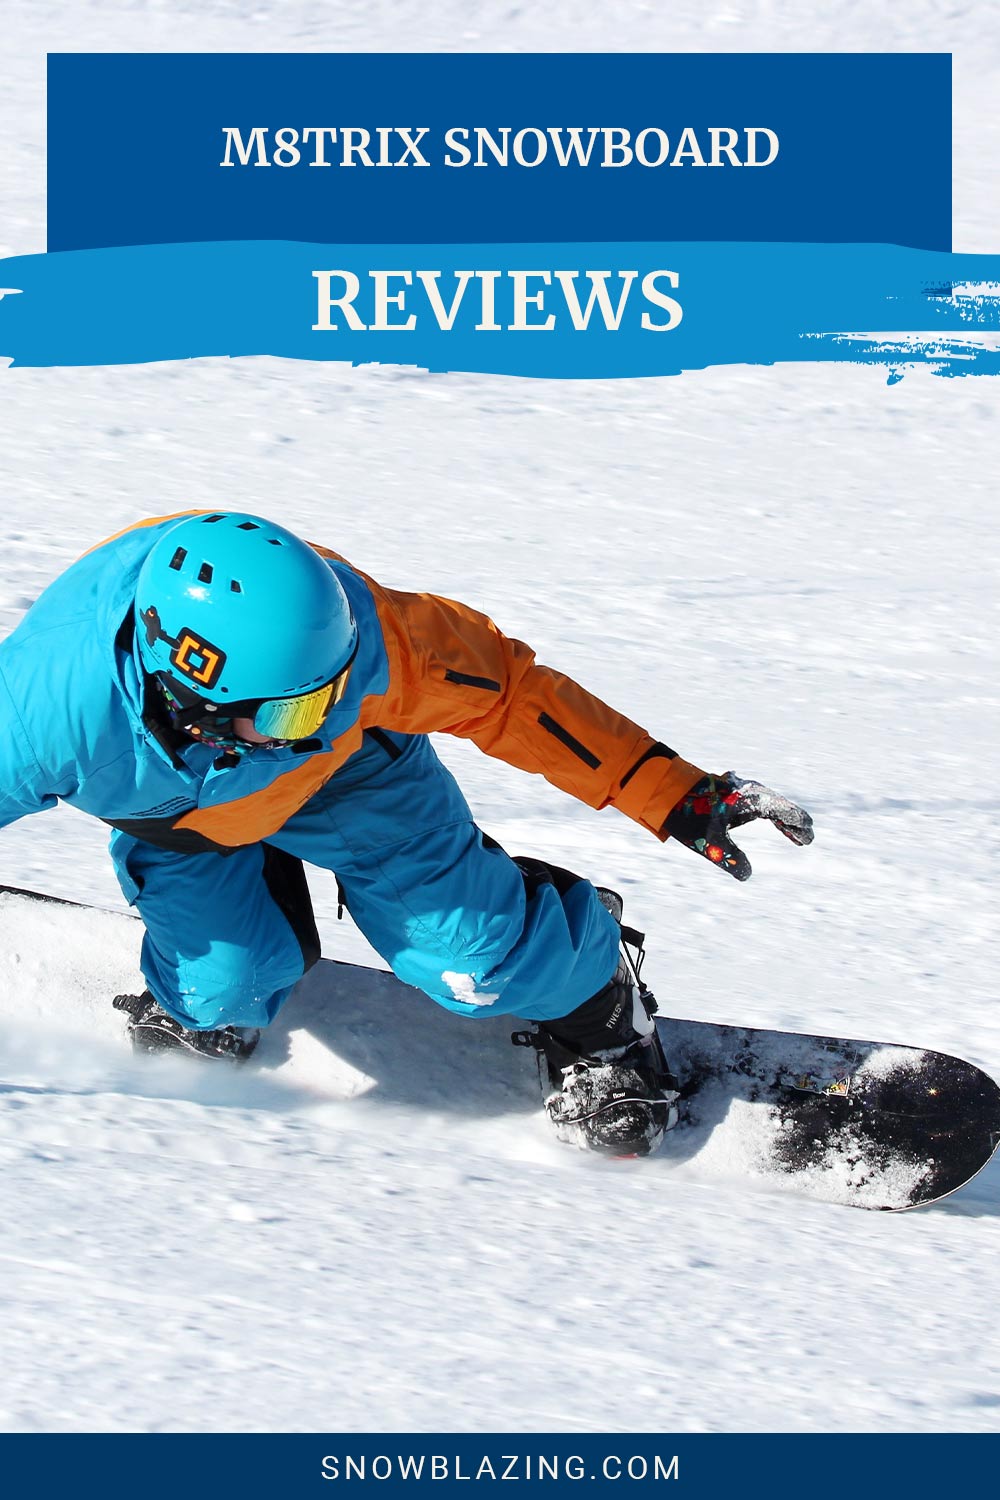 Man in Blue and orange jacket maneuvering with a snowboard - M8trix Snowboard Reviews